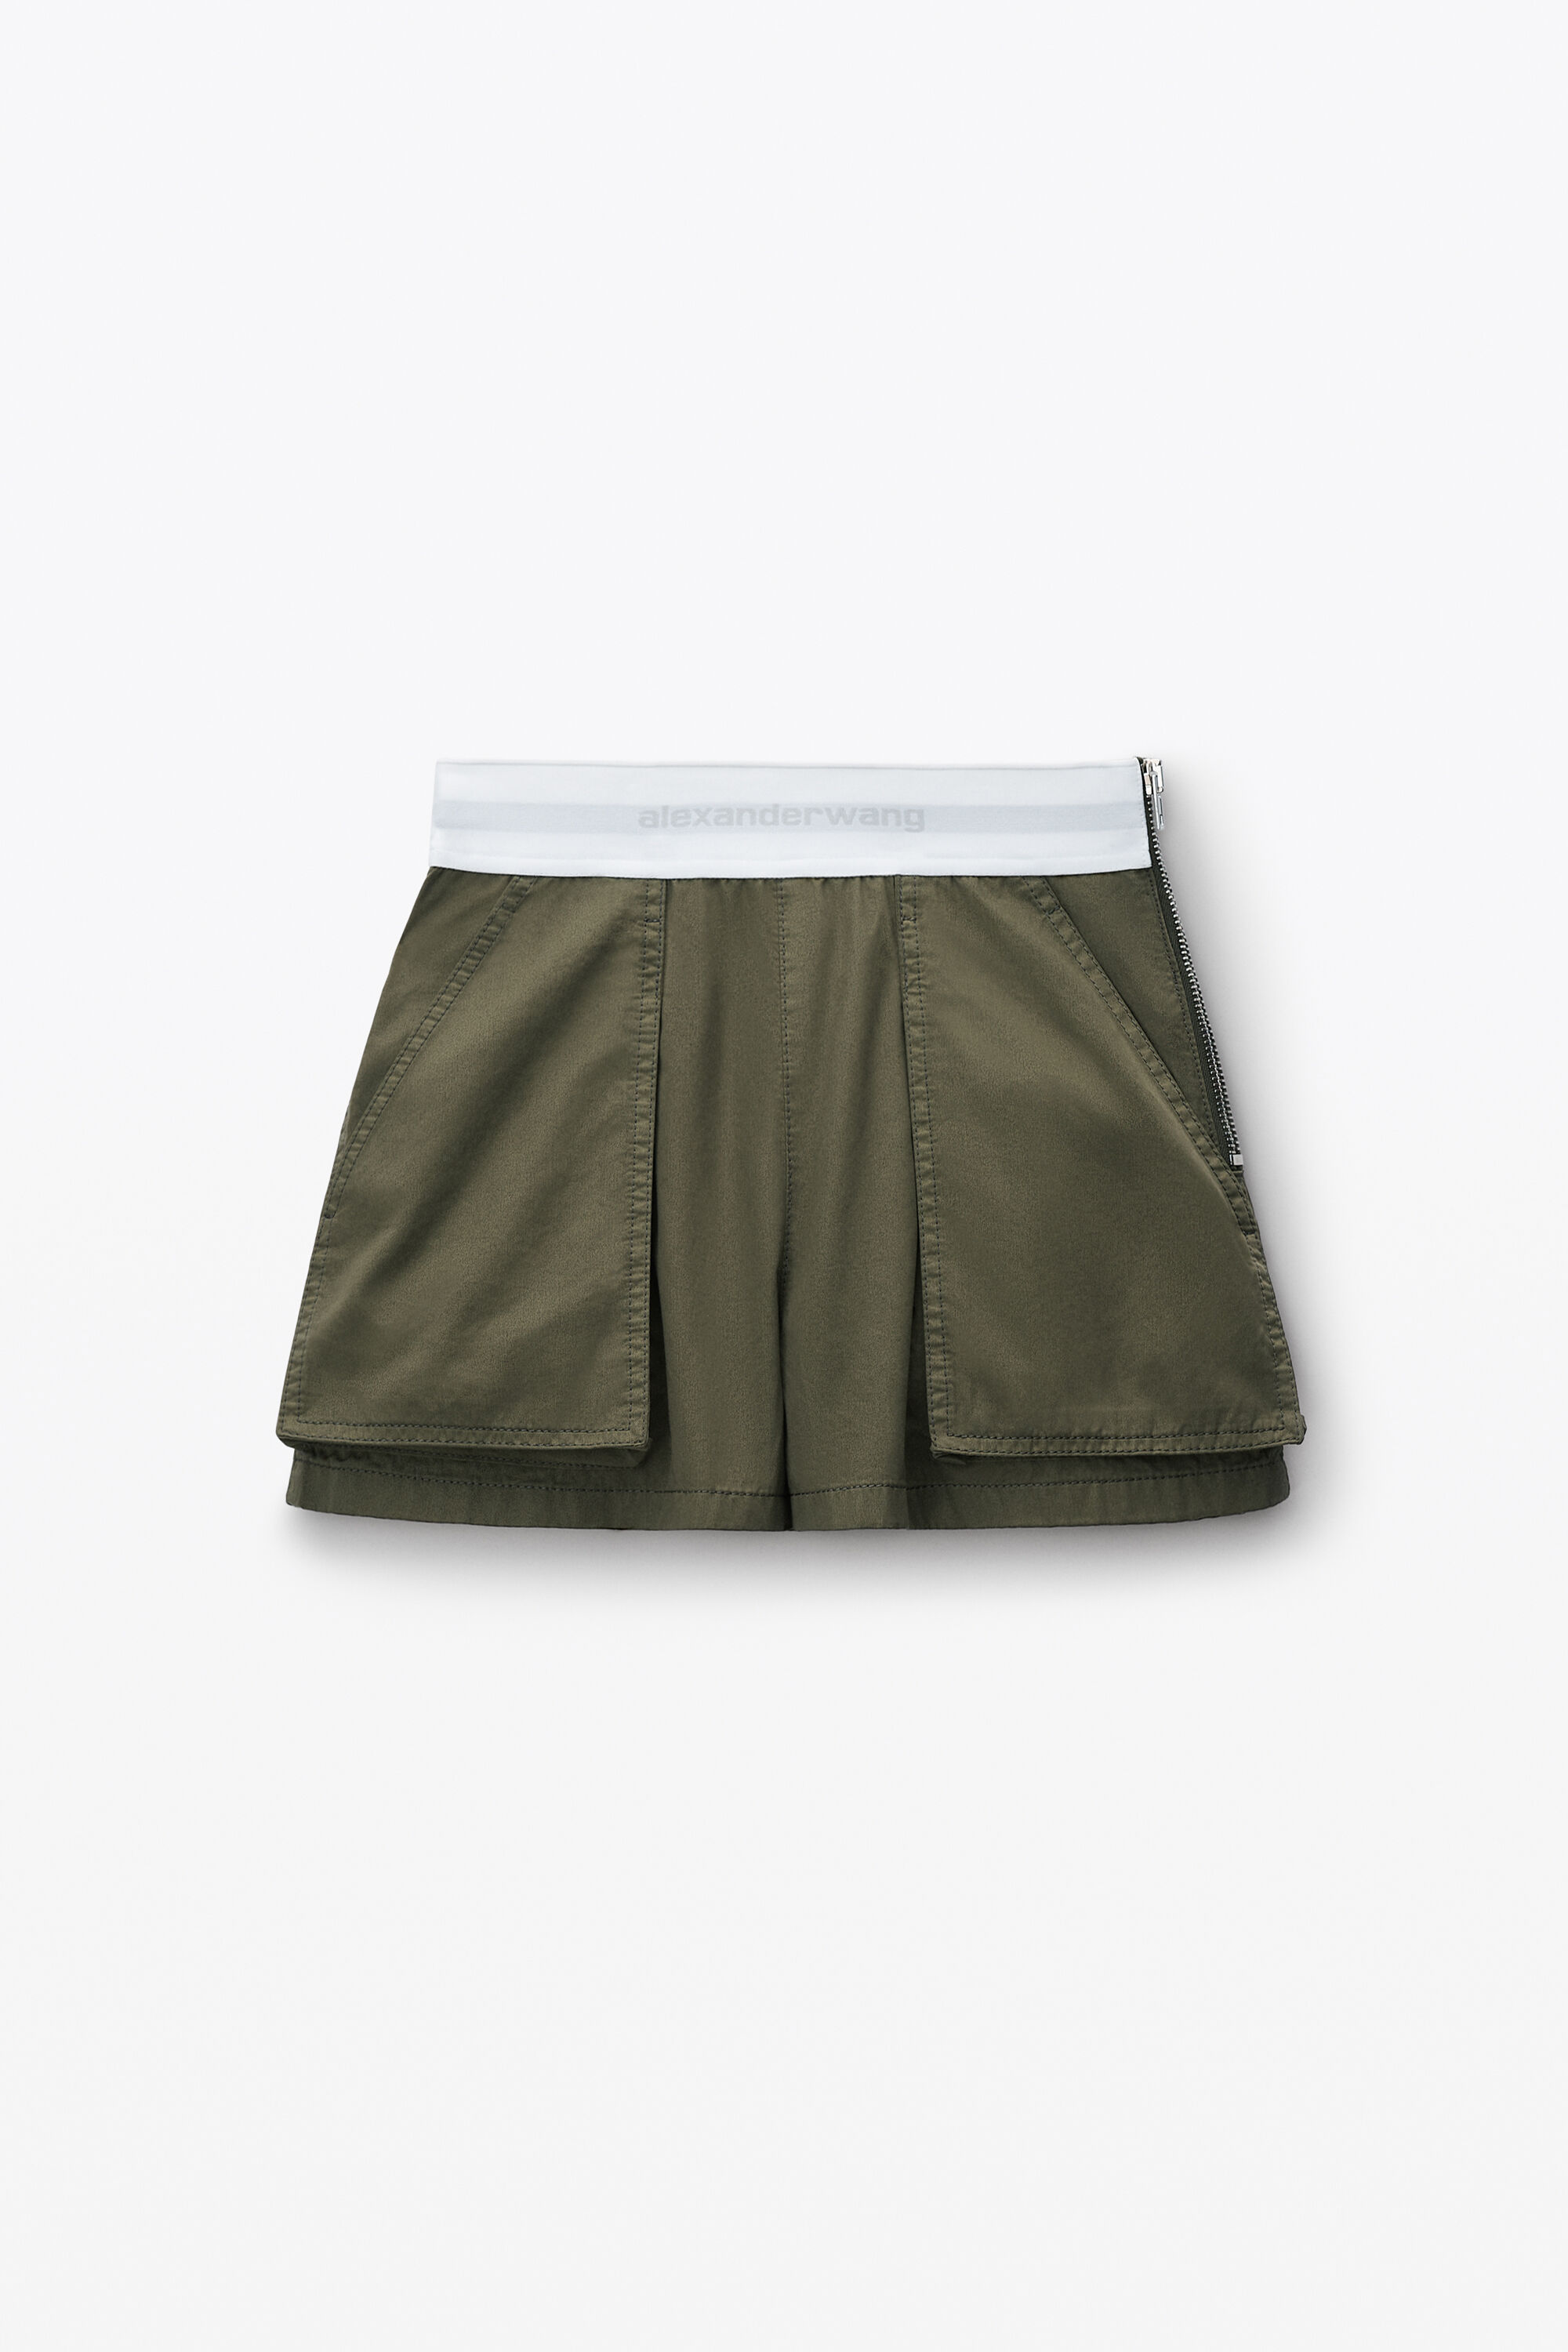 High-Waisted Cargo Rave Short in ARMY GREEN | alexanderwang®